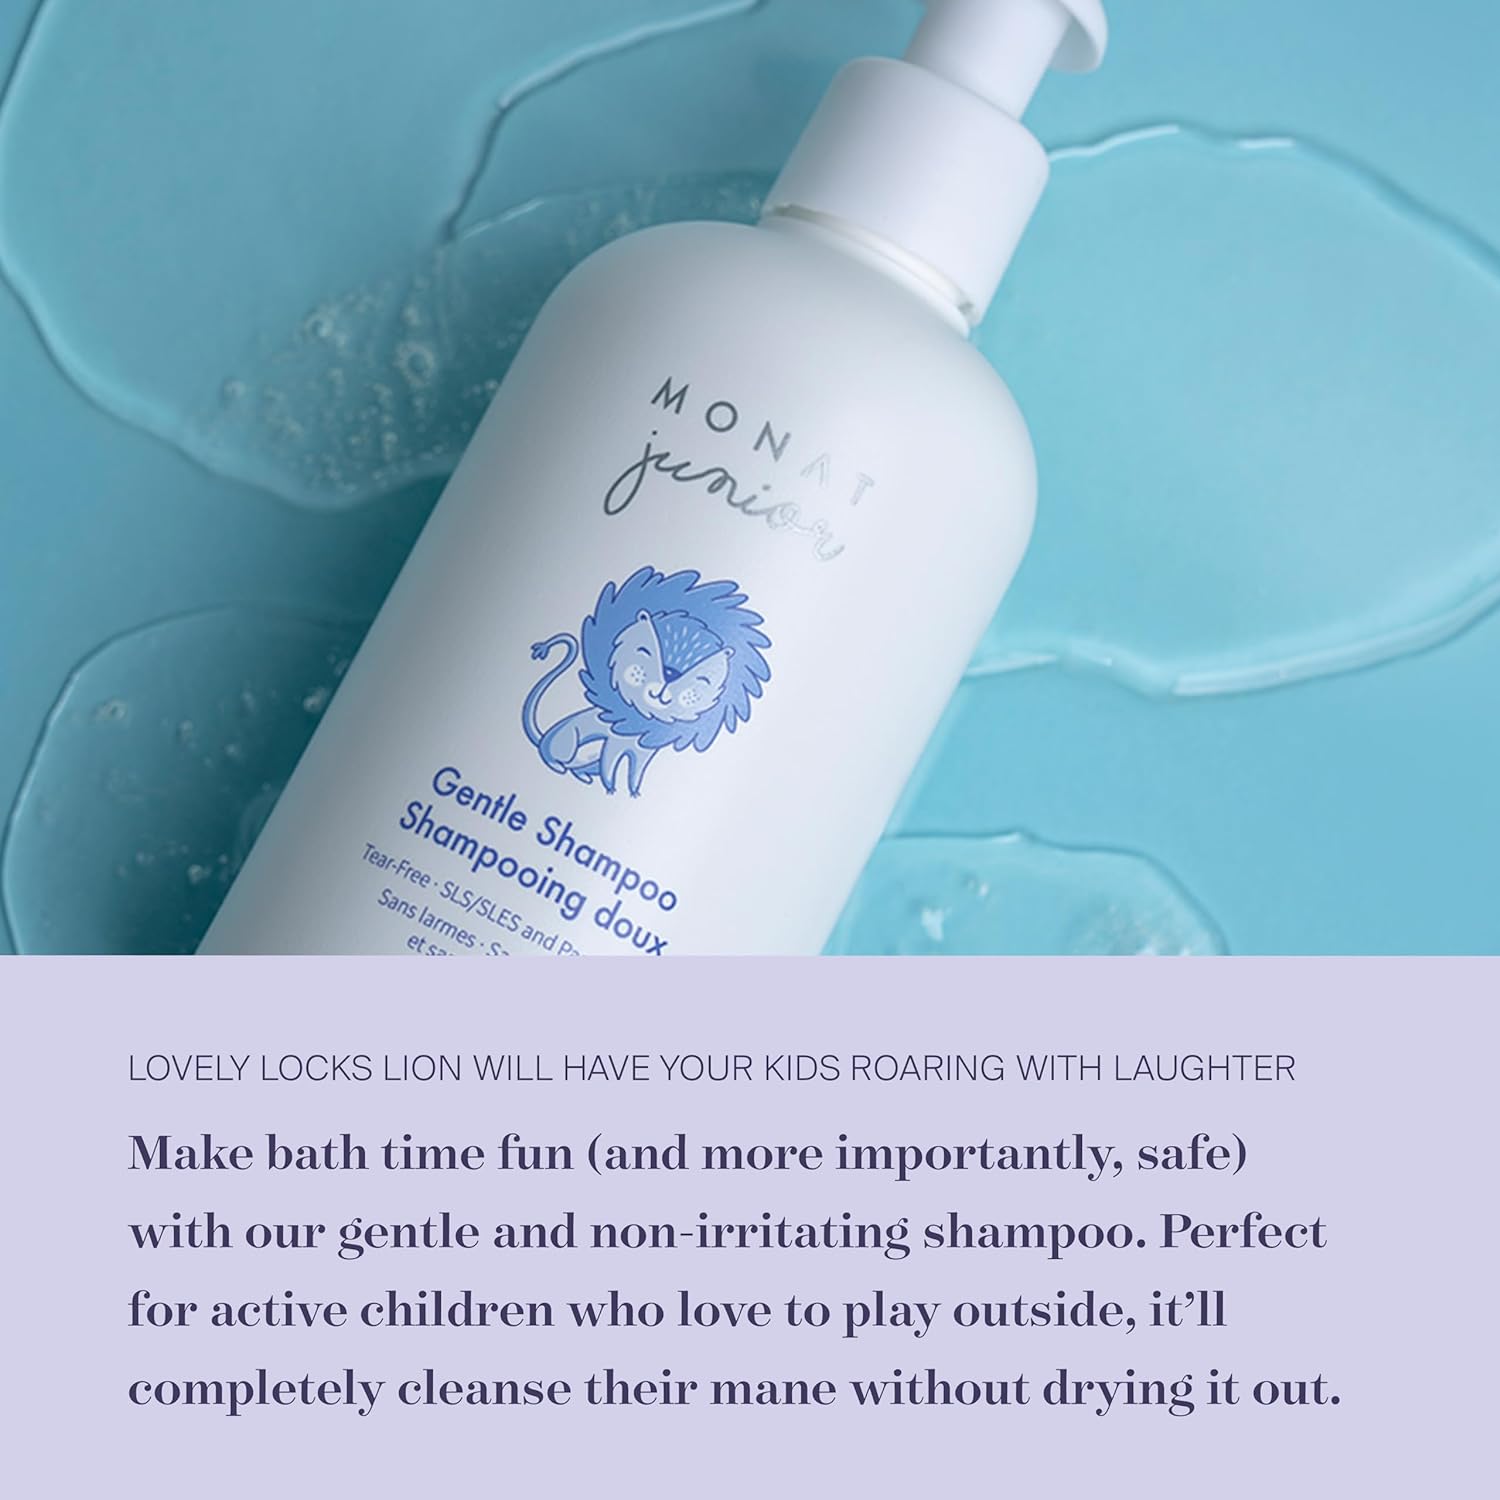 MONAT Junior™ Gentle Shampoo - A safe, Gentle and Non-irritating Hair Shampoo for children. All Natural Tear-free, Sulfate & Paraben-free - Net Wt. 237 ml / 8 fl. oz. : Baby